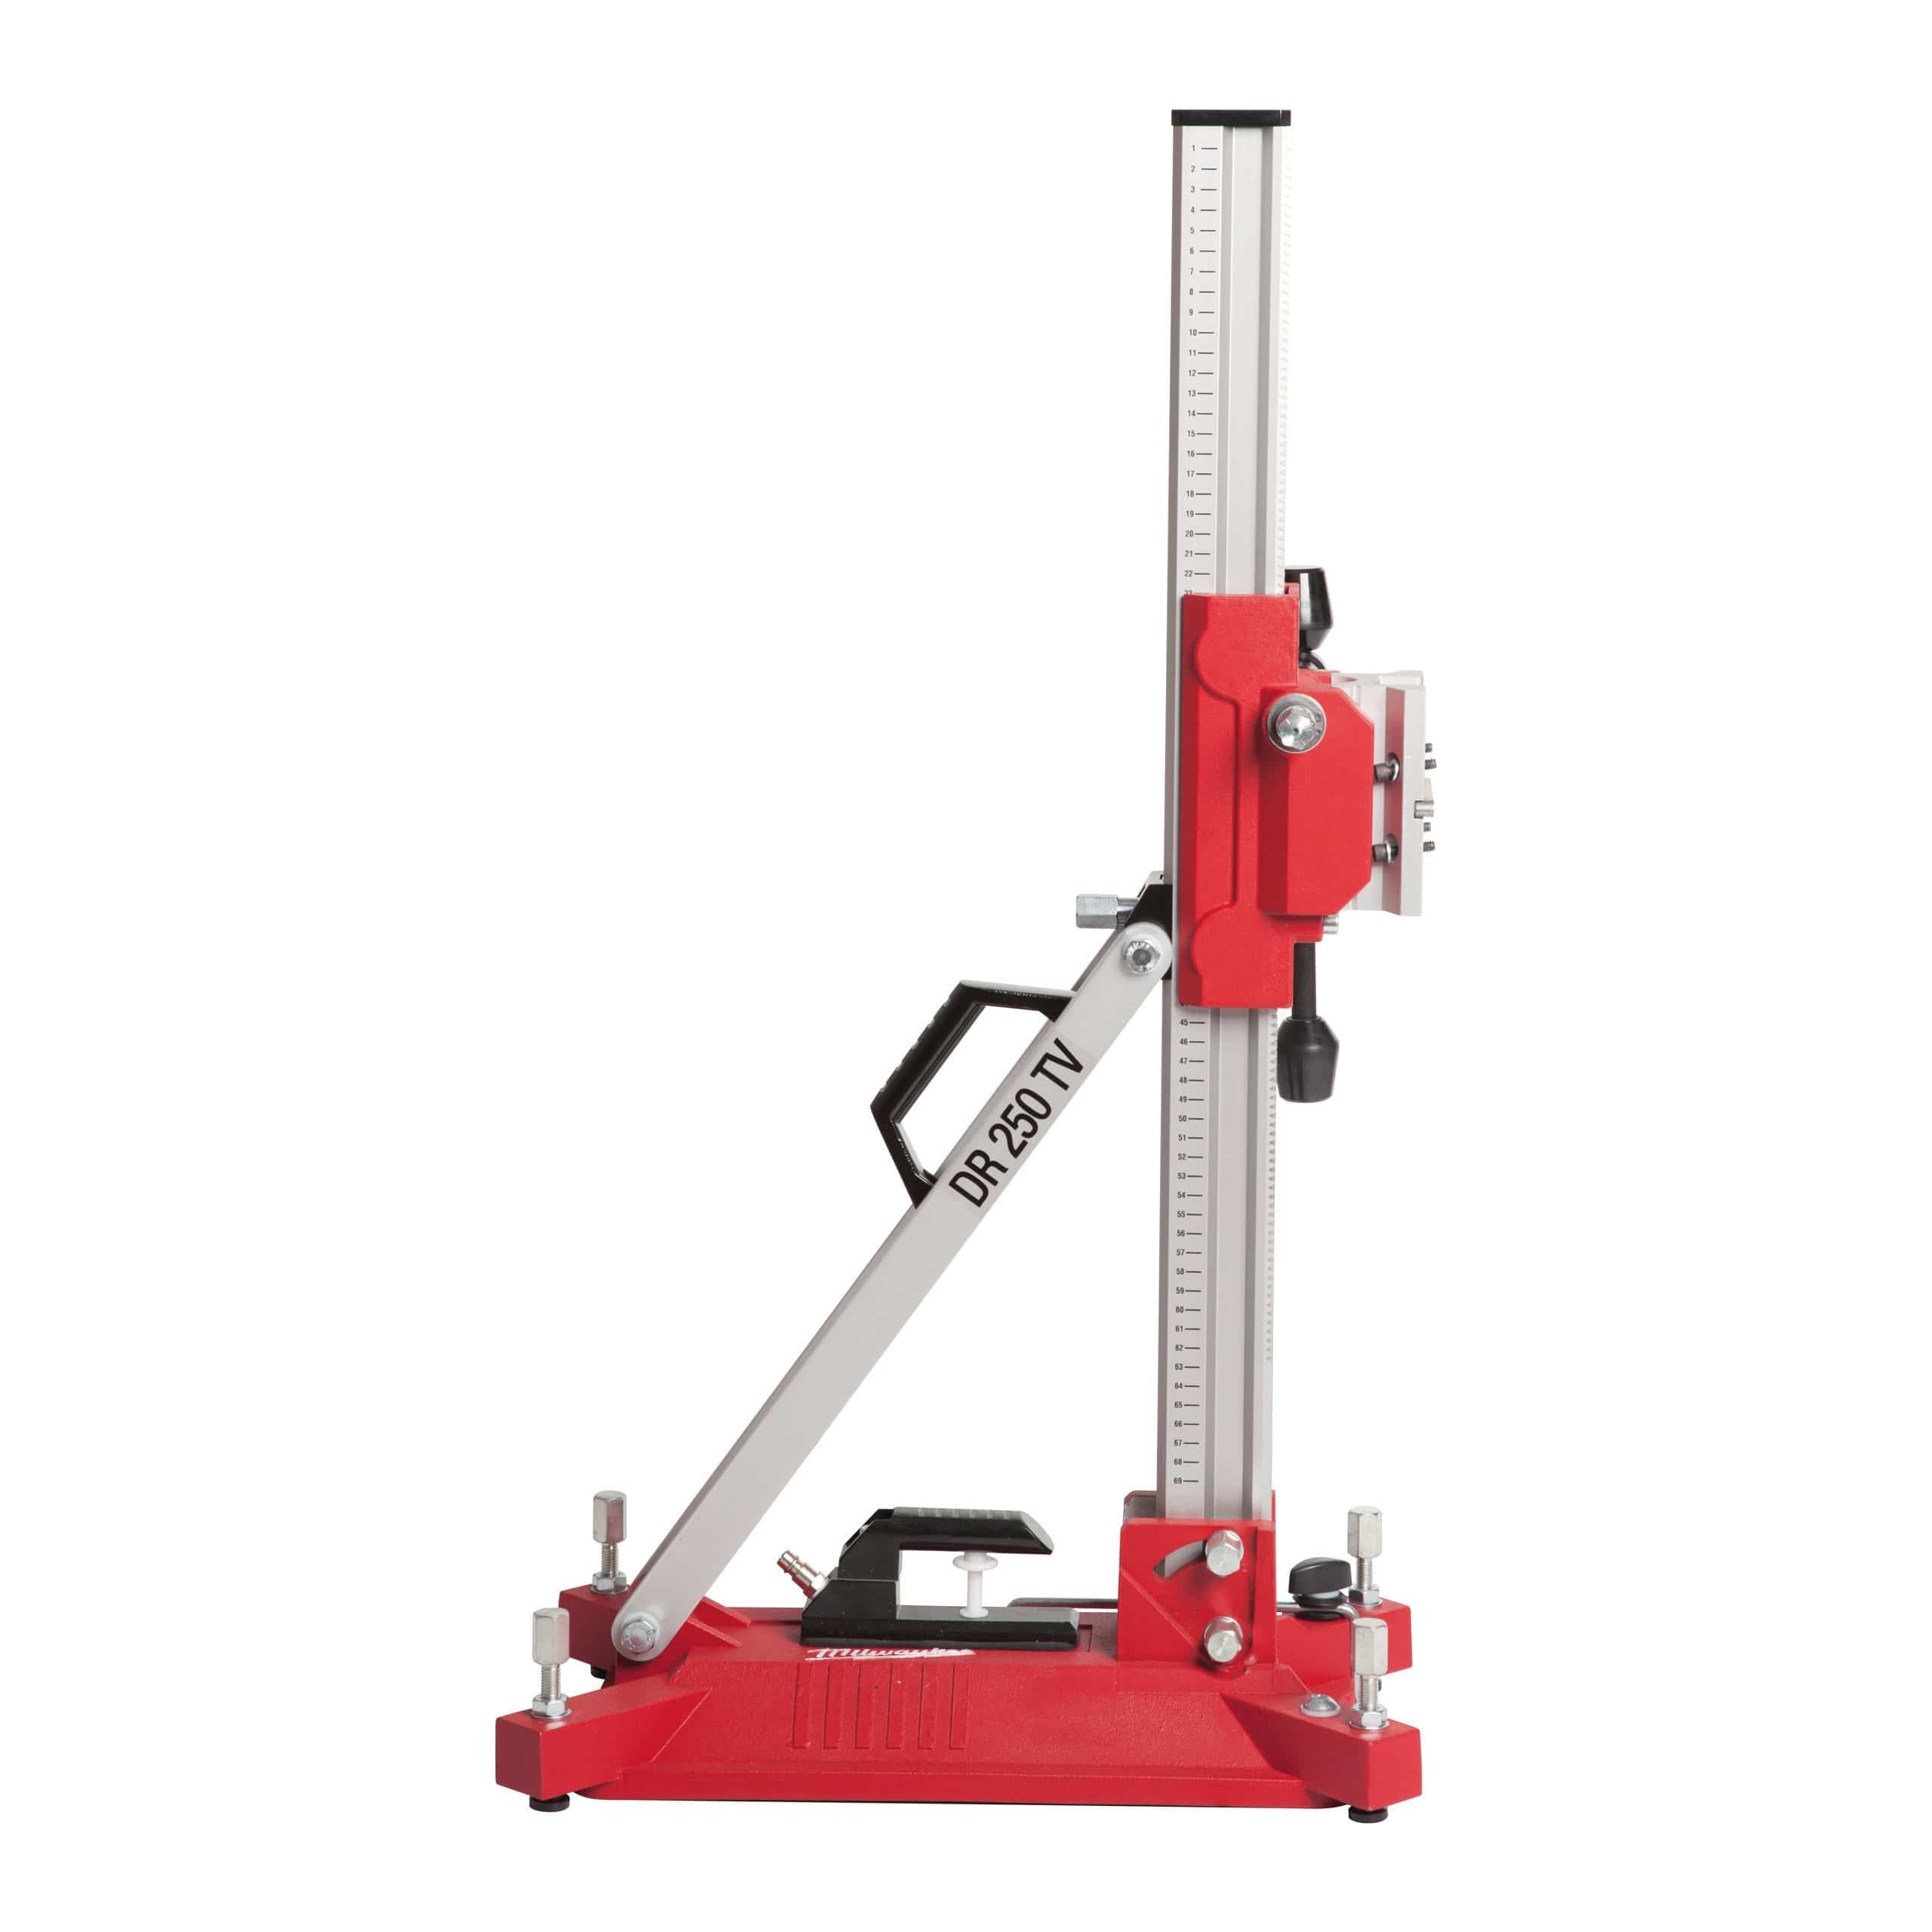 Milwaukee Diamond Drill Stand For DCM 2-250 C - DR 250 TV | Accra, Ghana Tools Building Steel Engineering Hardware tool